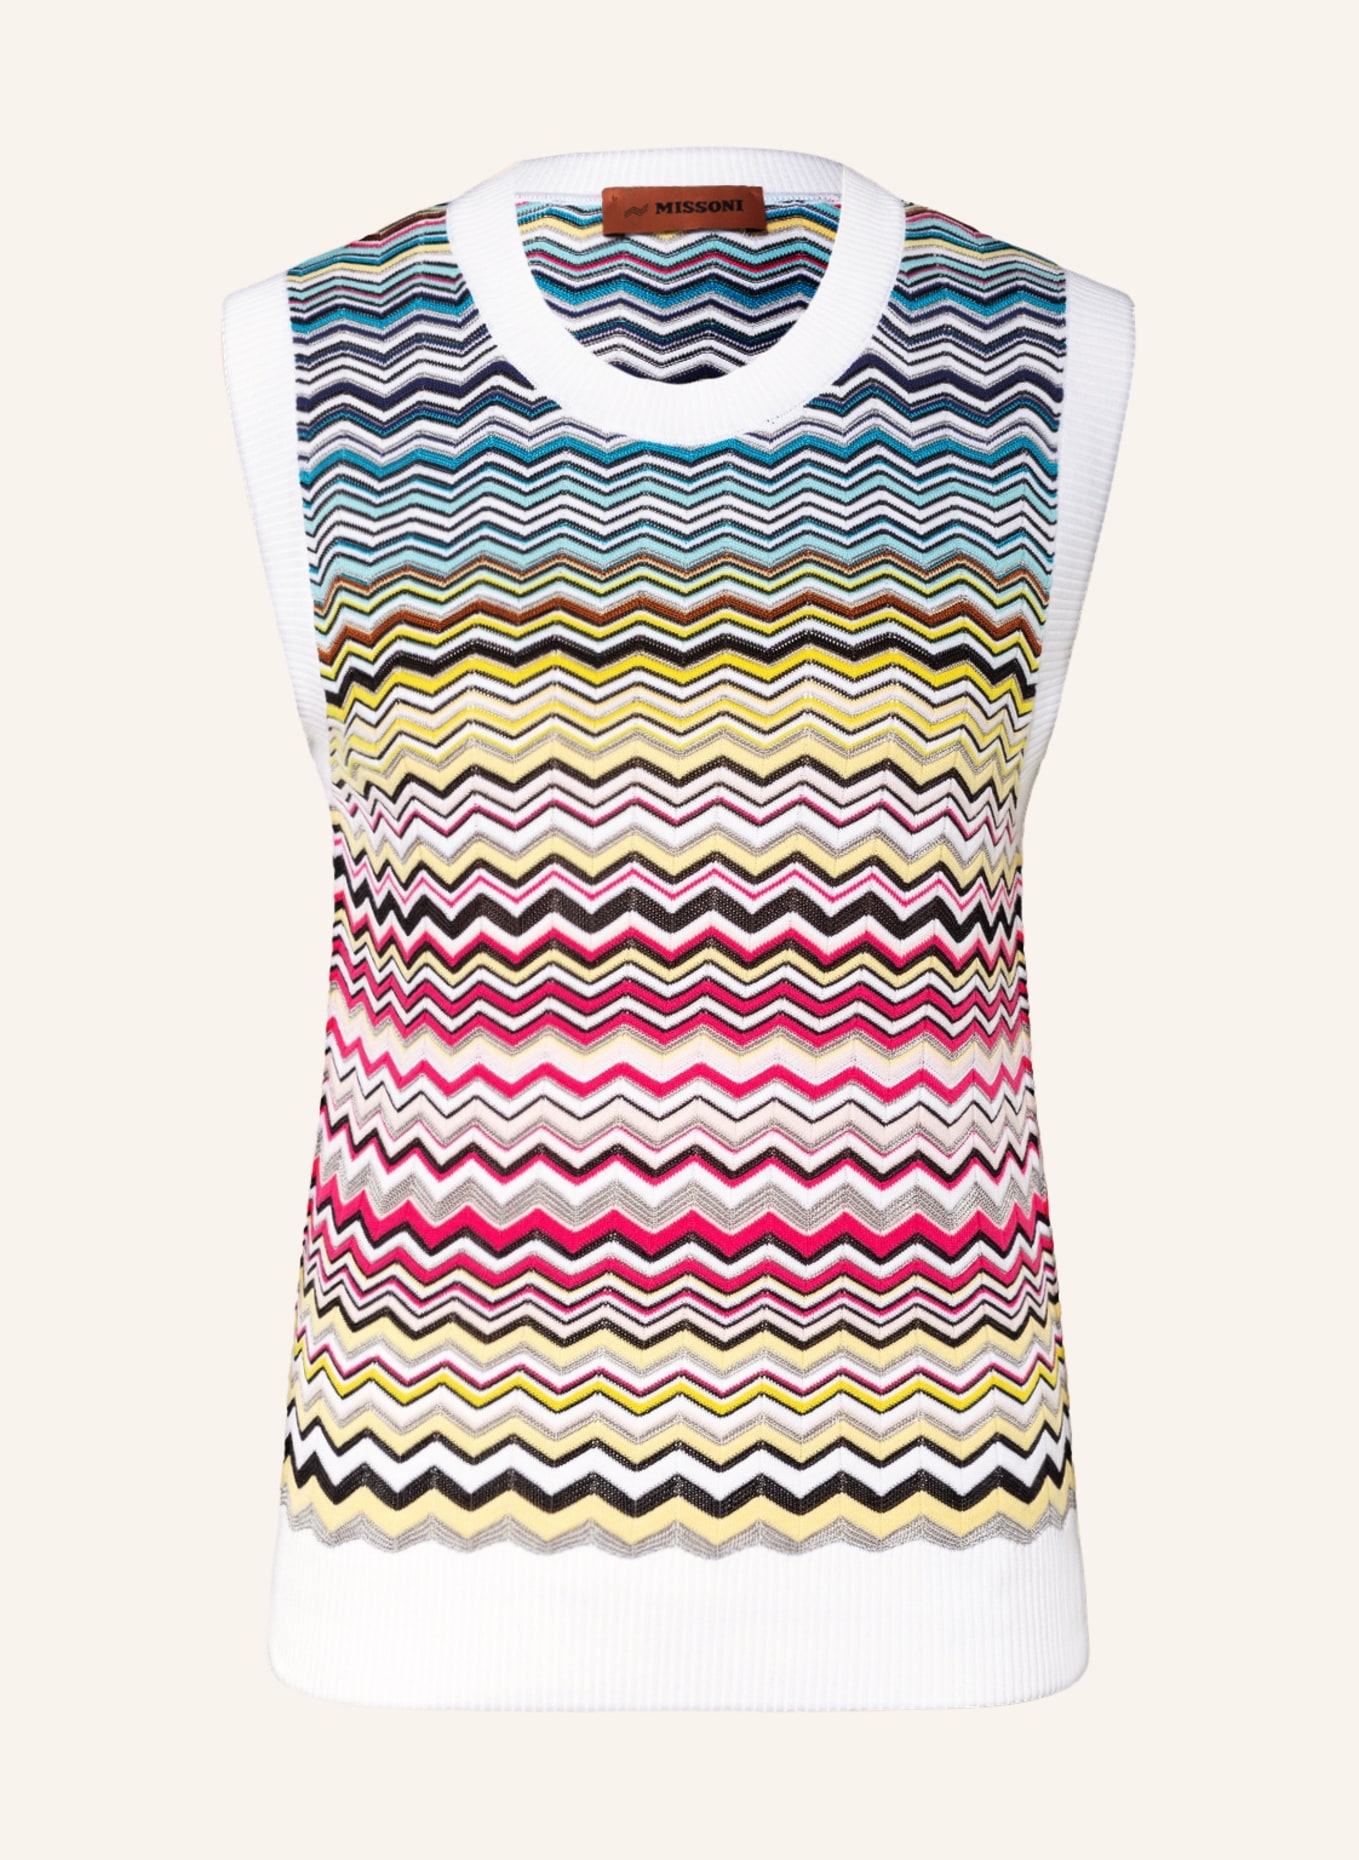 MISSONI Top, Color: BLUE/ YELLOW/ PINK (Image 1)